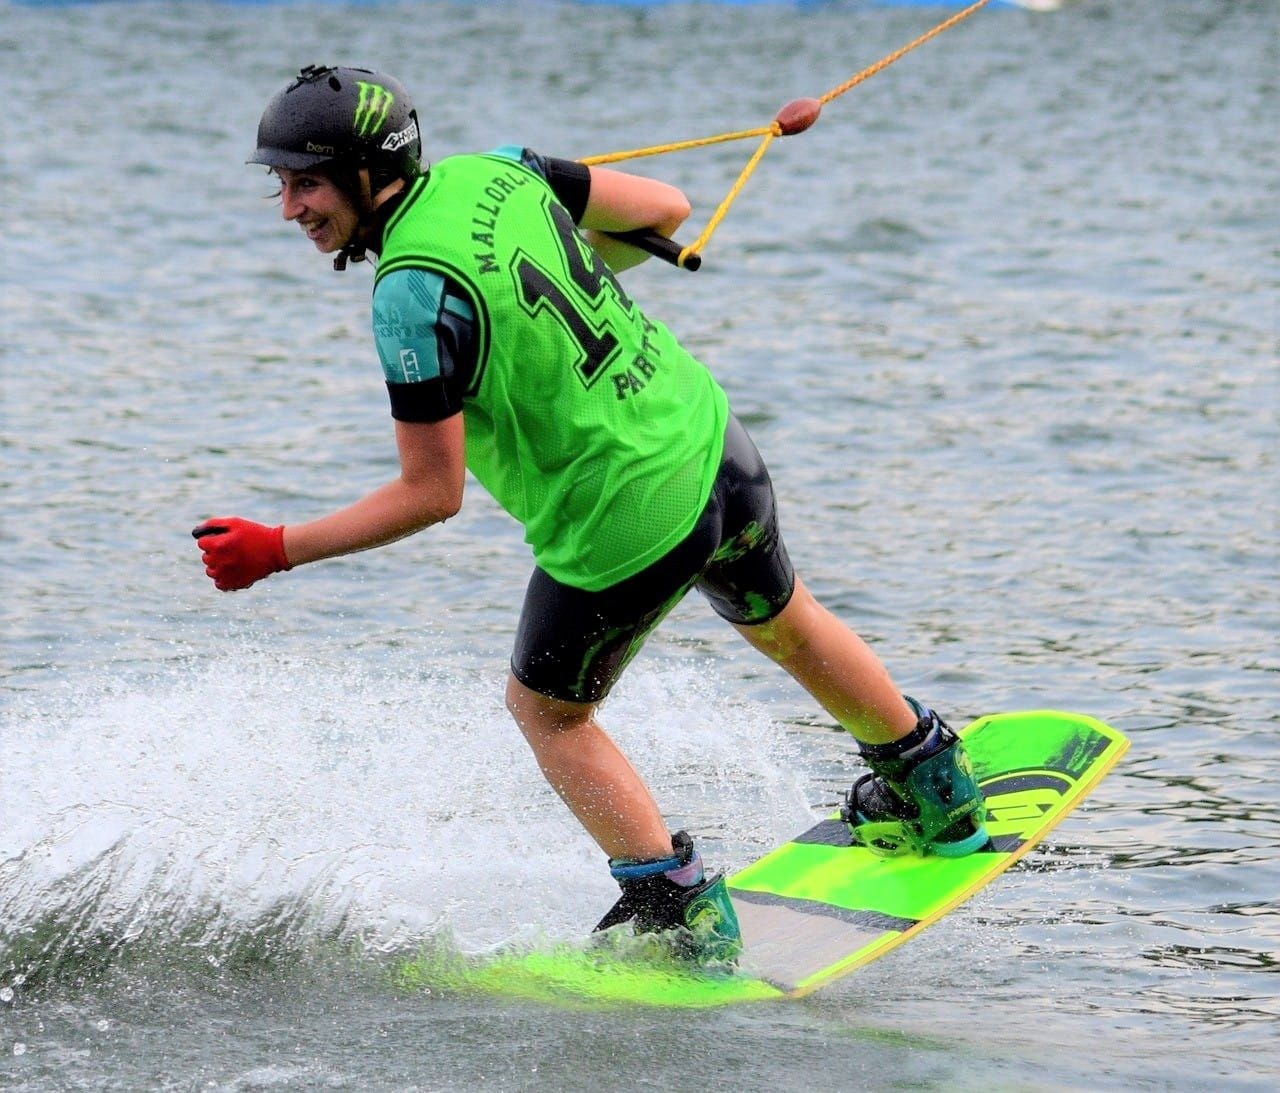 Wakeboard for your team building